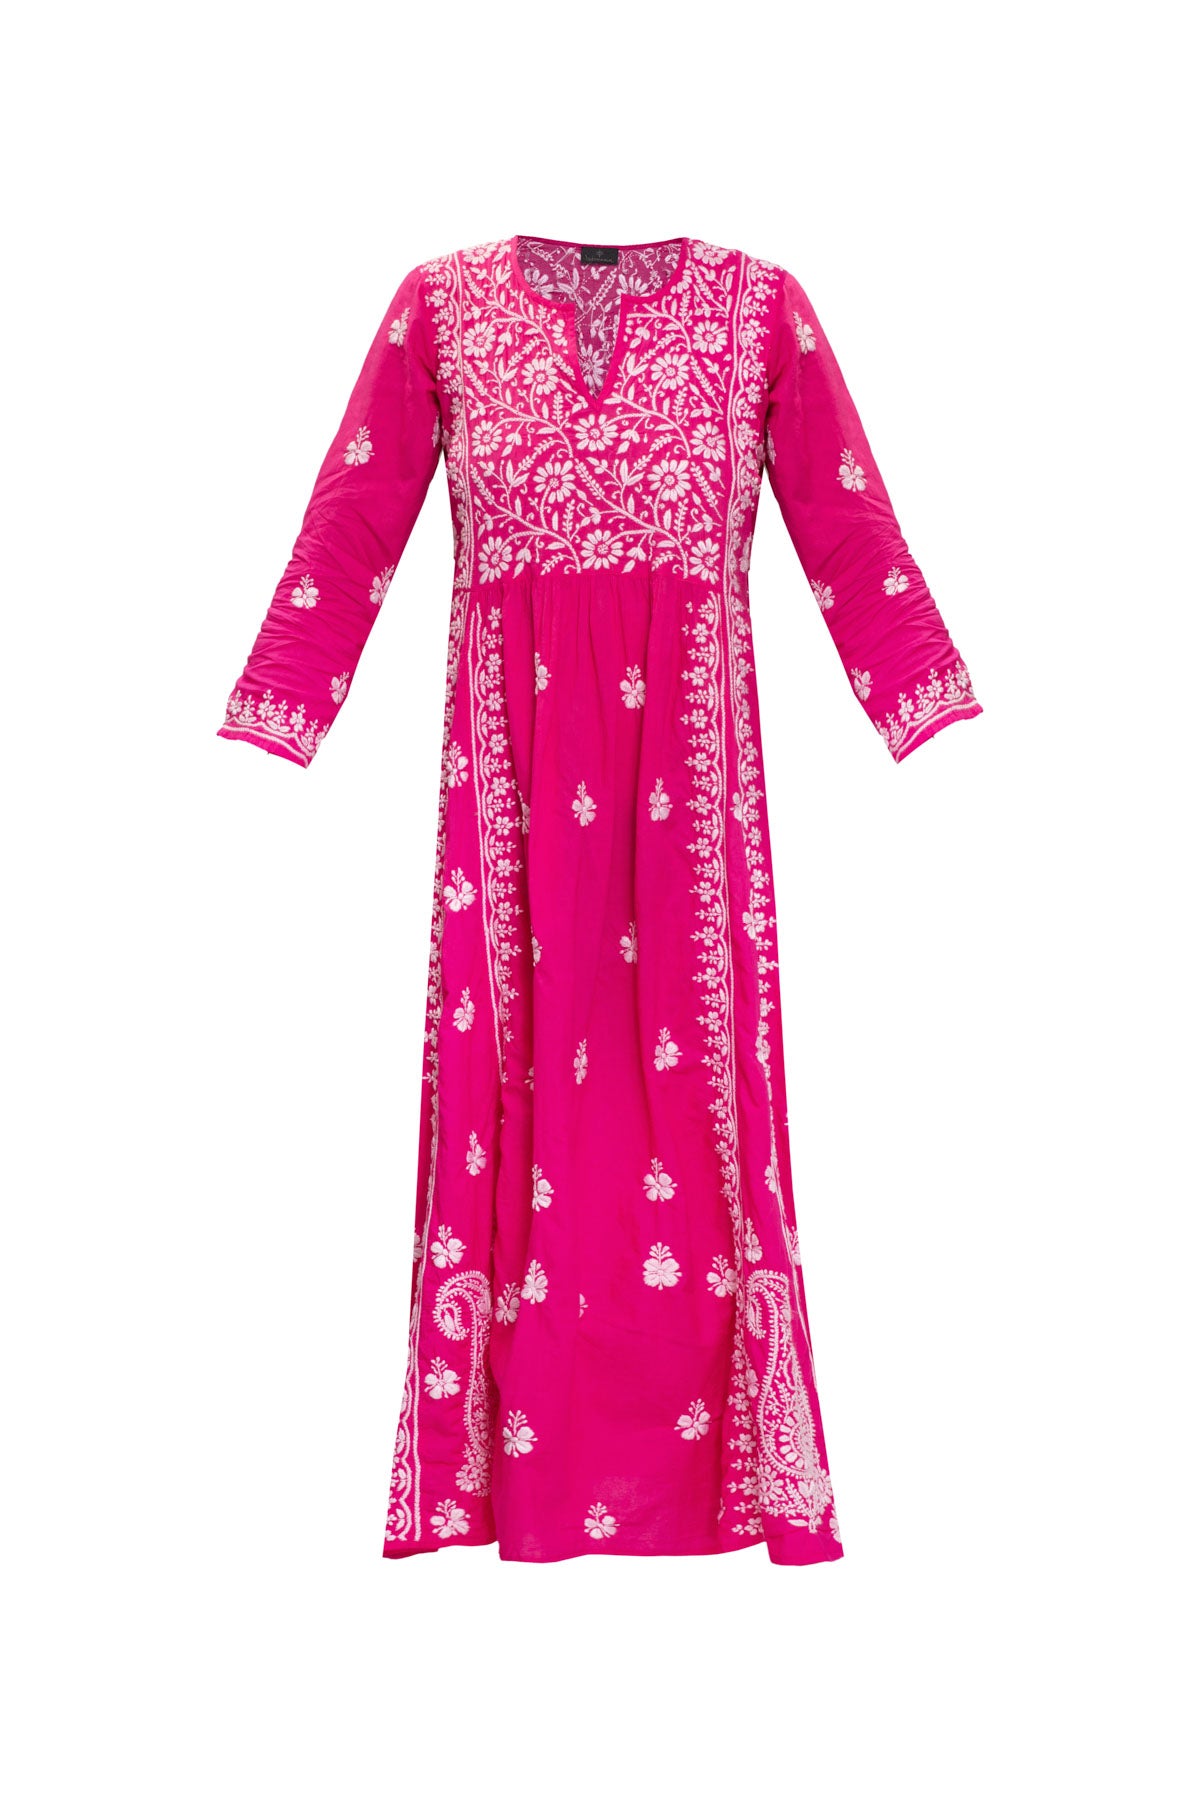 Cotton Embroidered Dress - Bright Pink